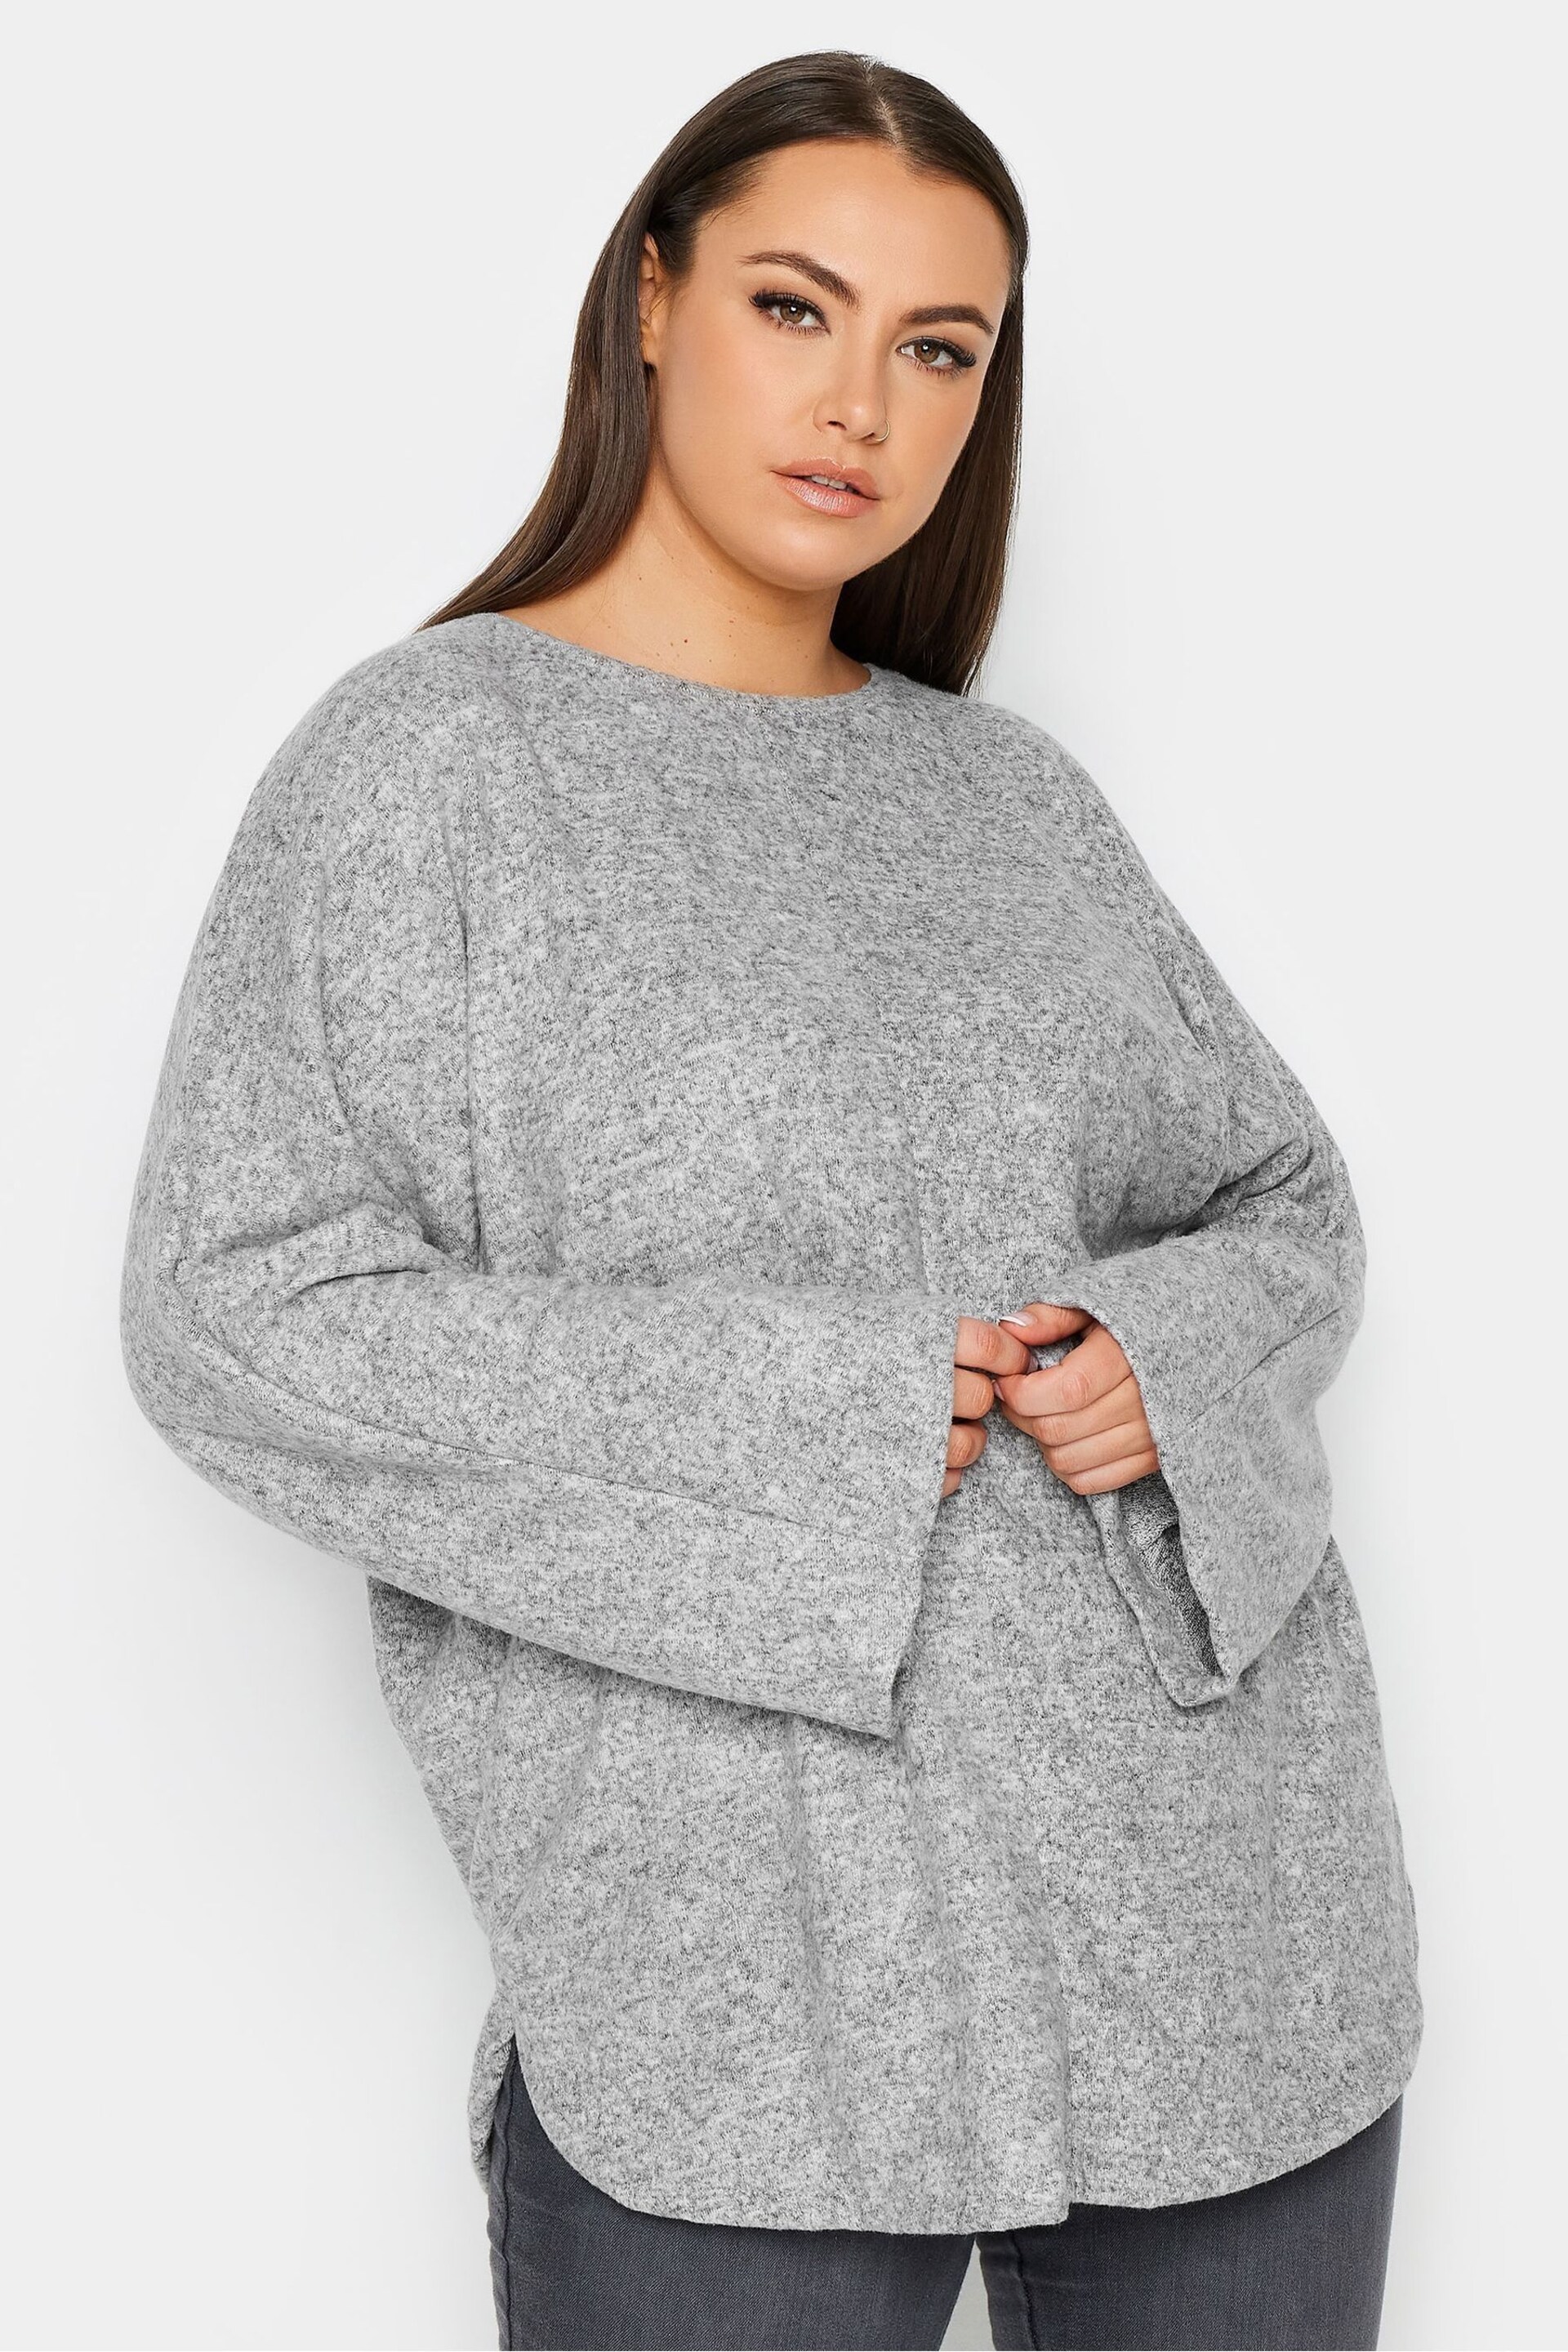 Yours Curve Grey Front Seam Soft Touch Jumper - Image 1 of 4